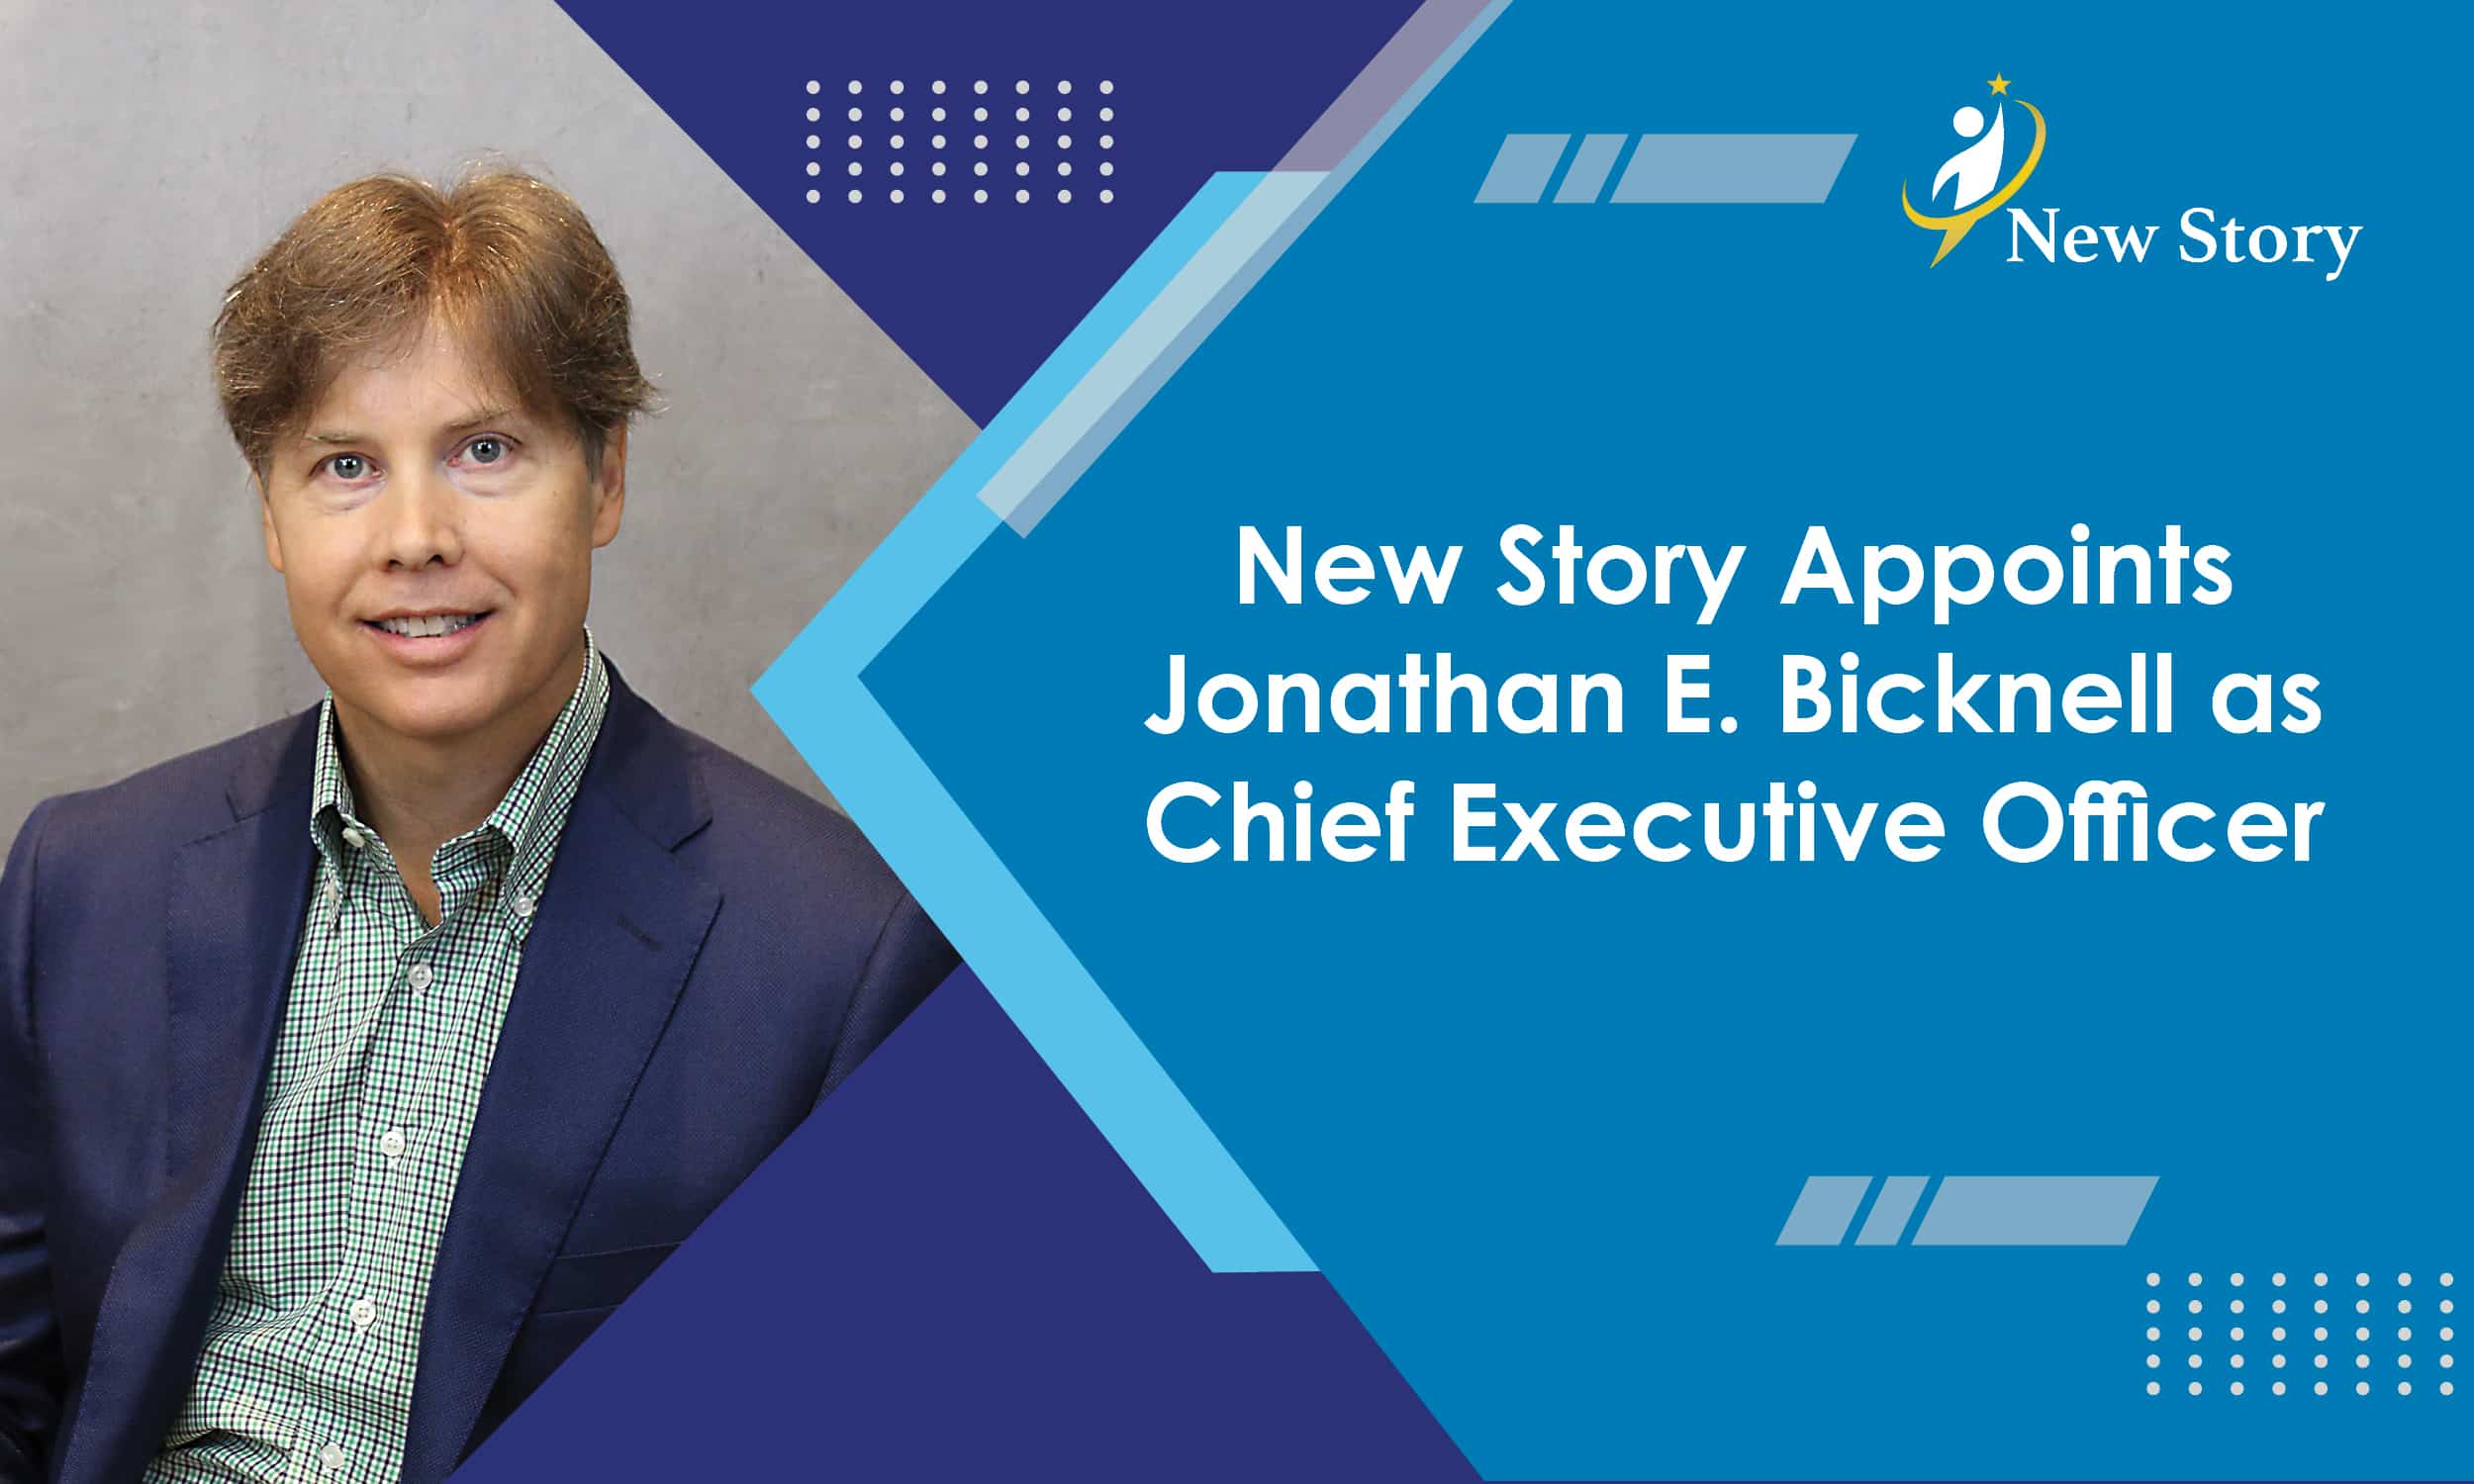 New Story Appoints Jonathan E. Bicknell as Chief Executive Officer